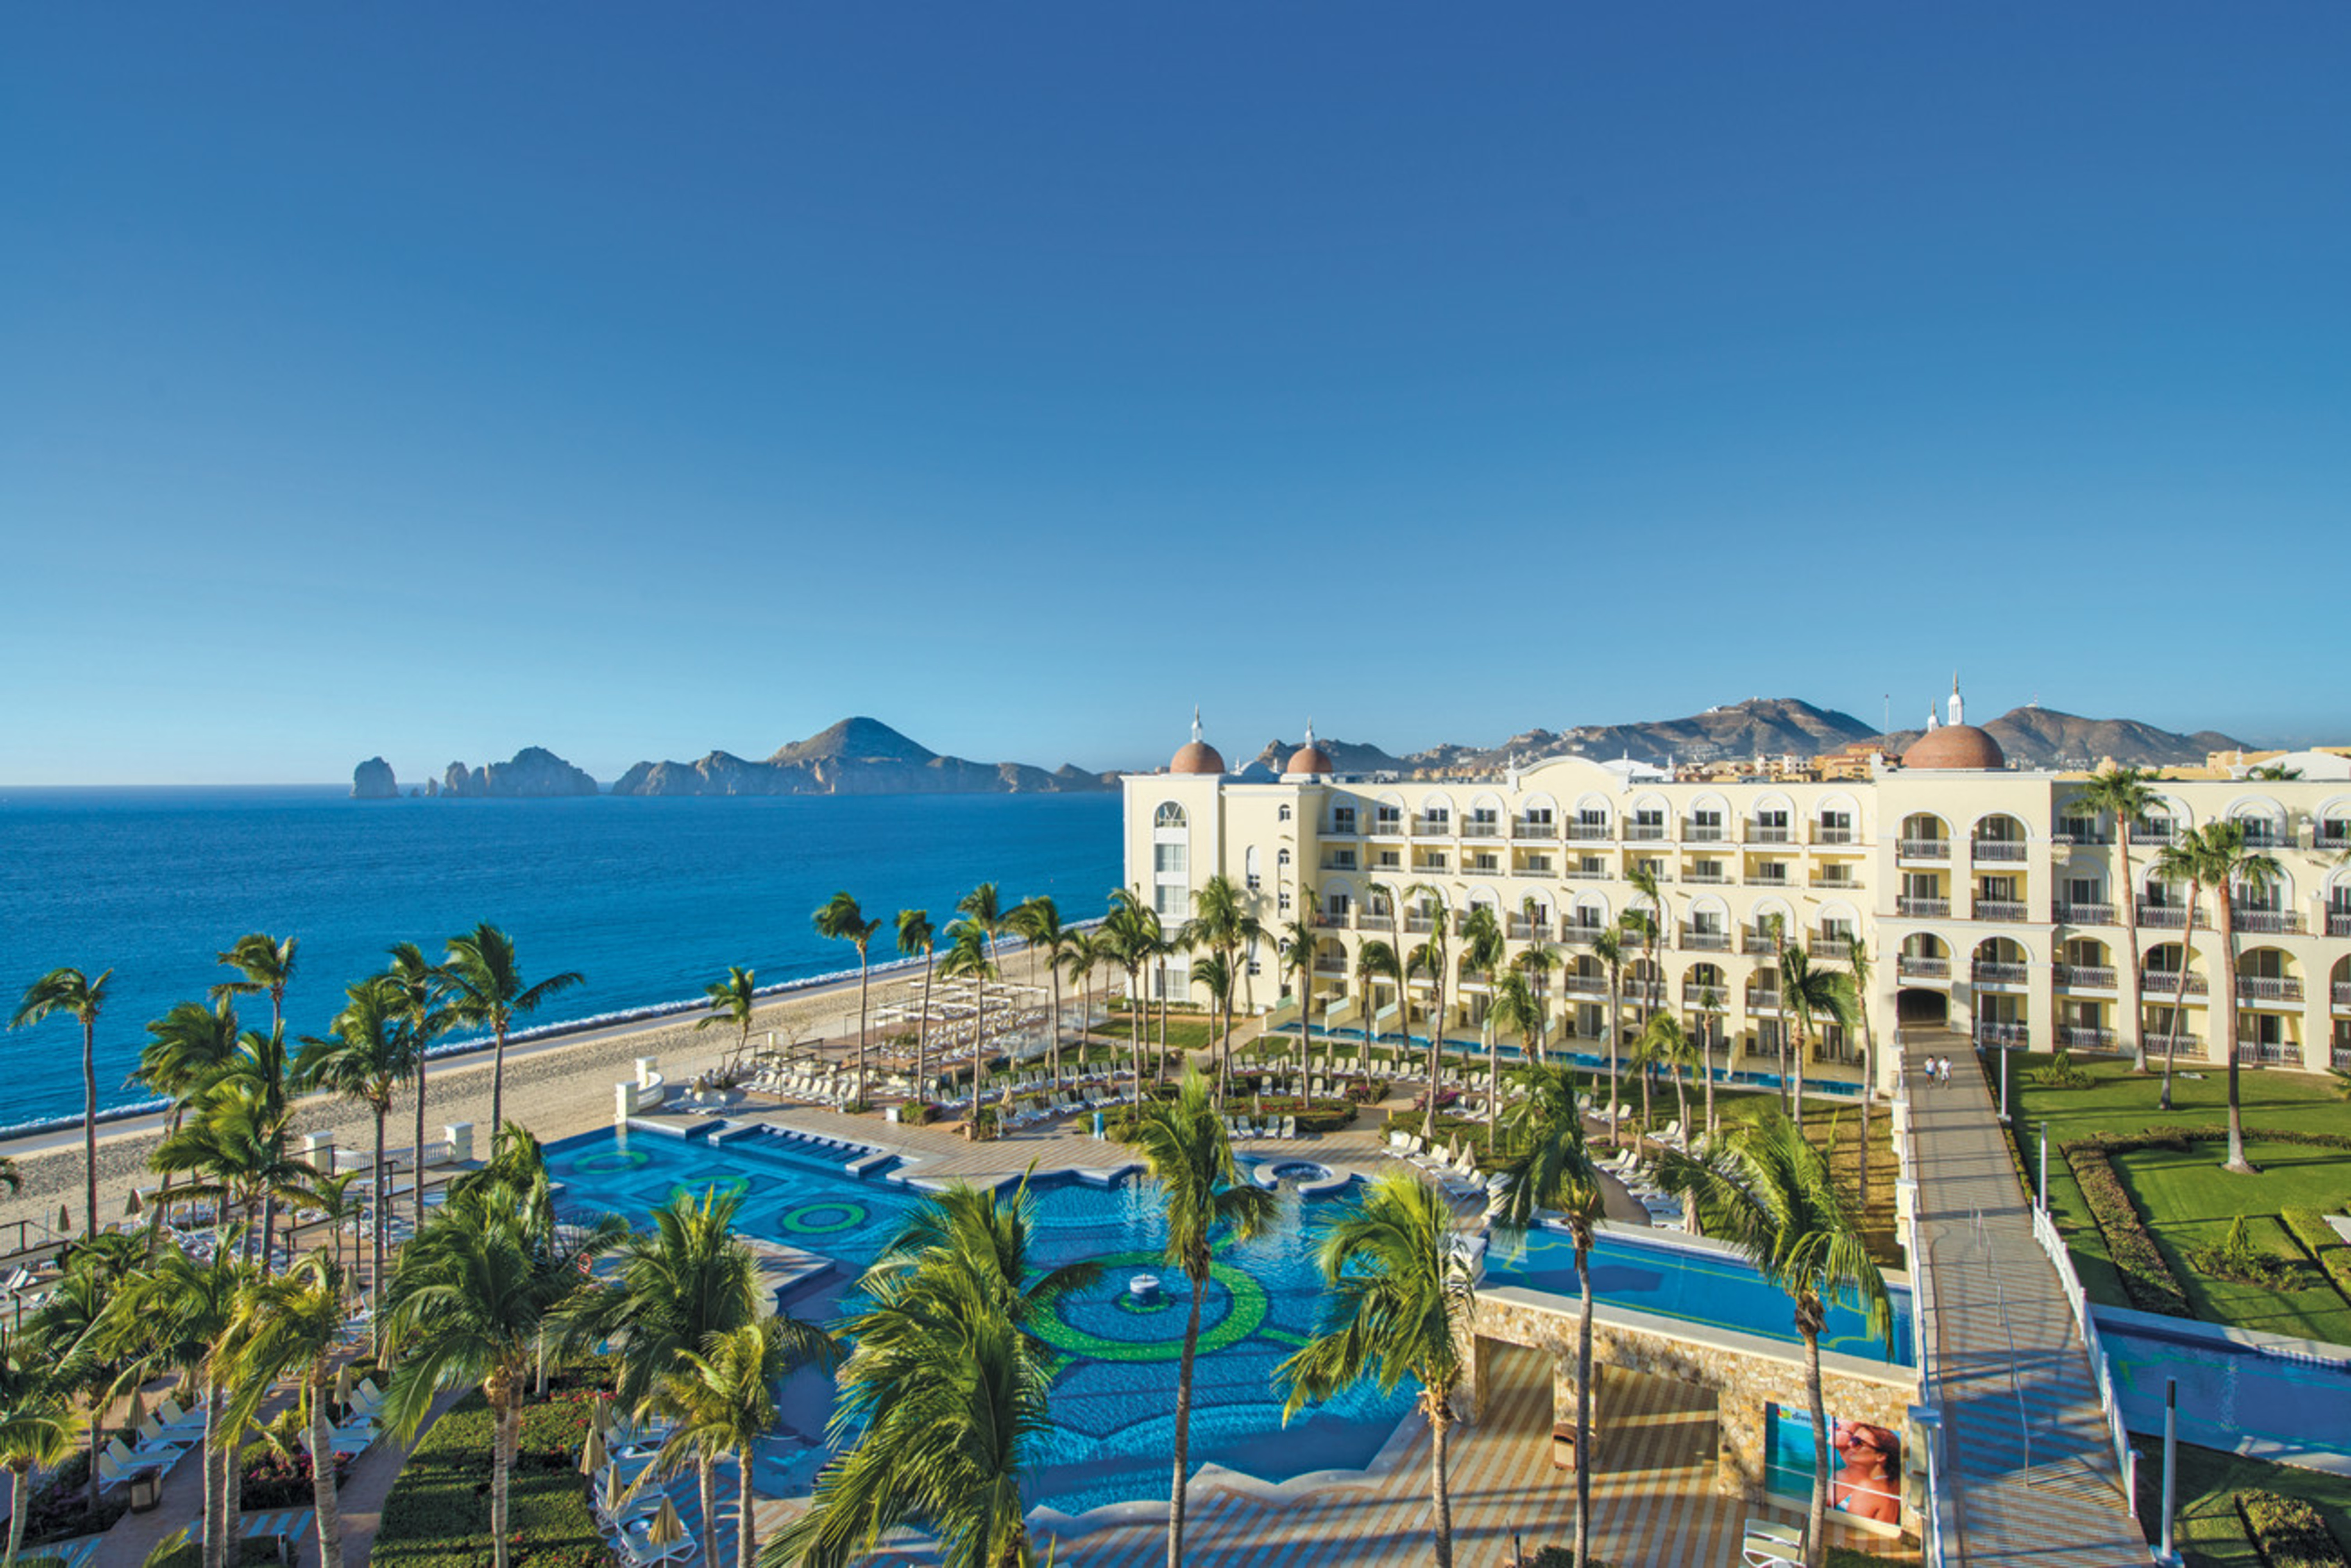 Have you heard about everything on offer at the Riu Palace ...